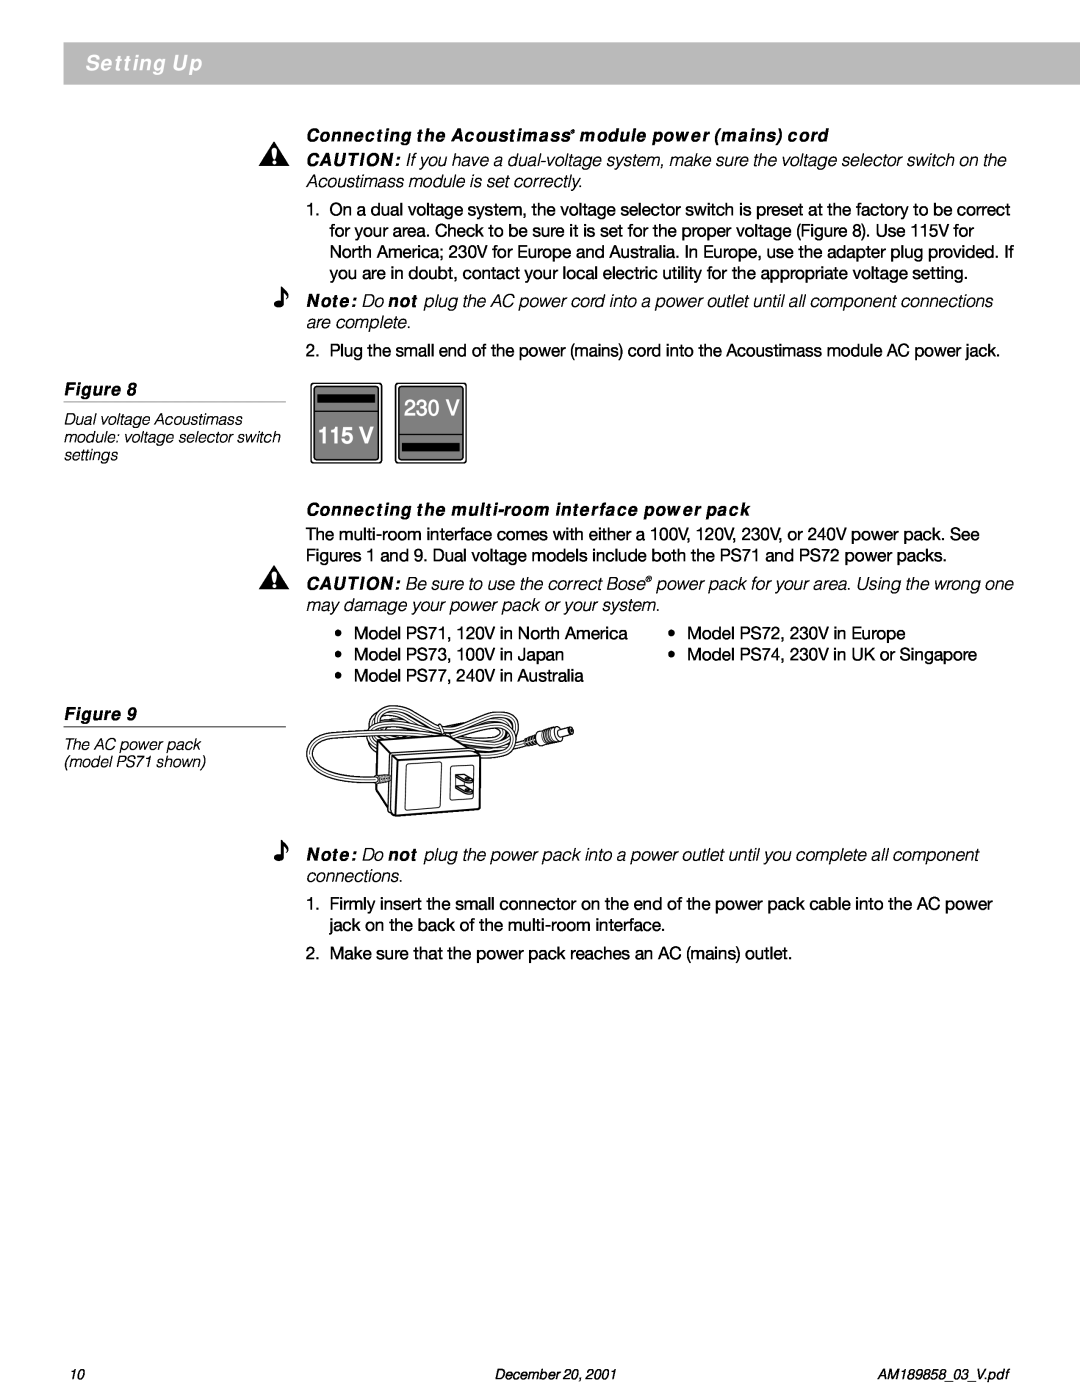 Bose 40 manual Setting Up, 230 115, Figure, Connecting the multi-roominterface power pack 